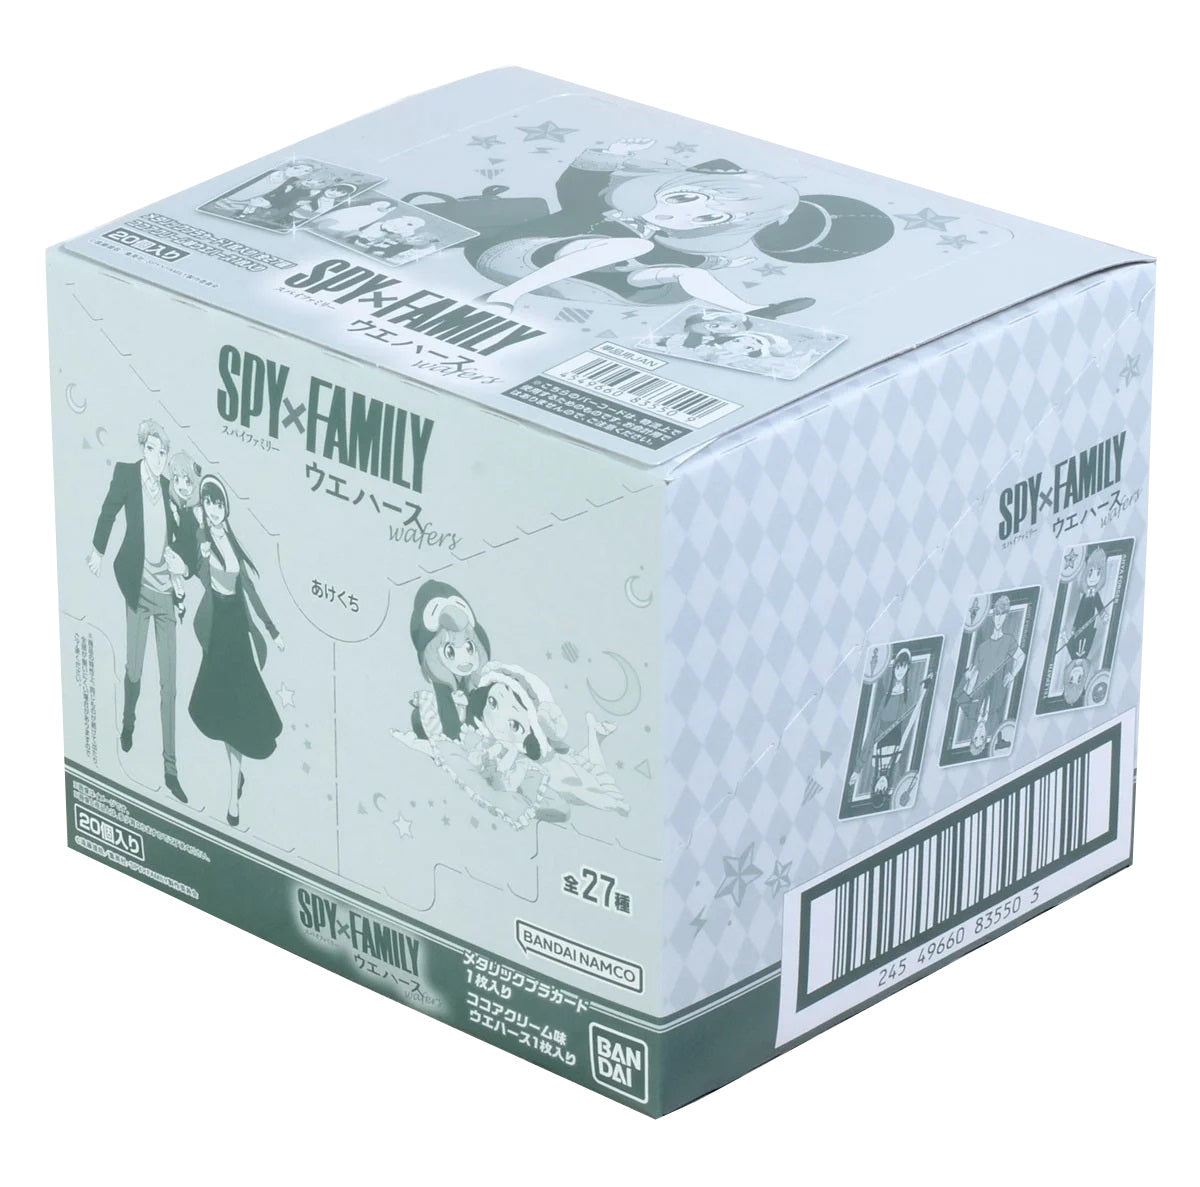 Spy x Family Metallic Card Collection Wafer